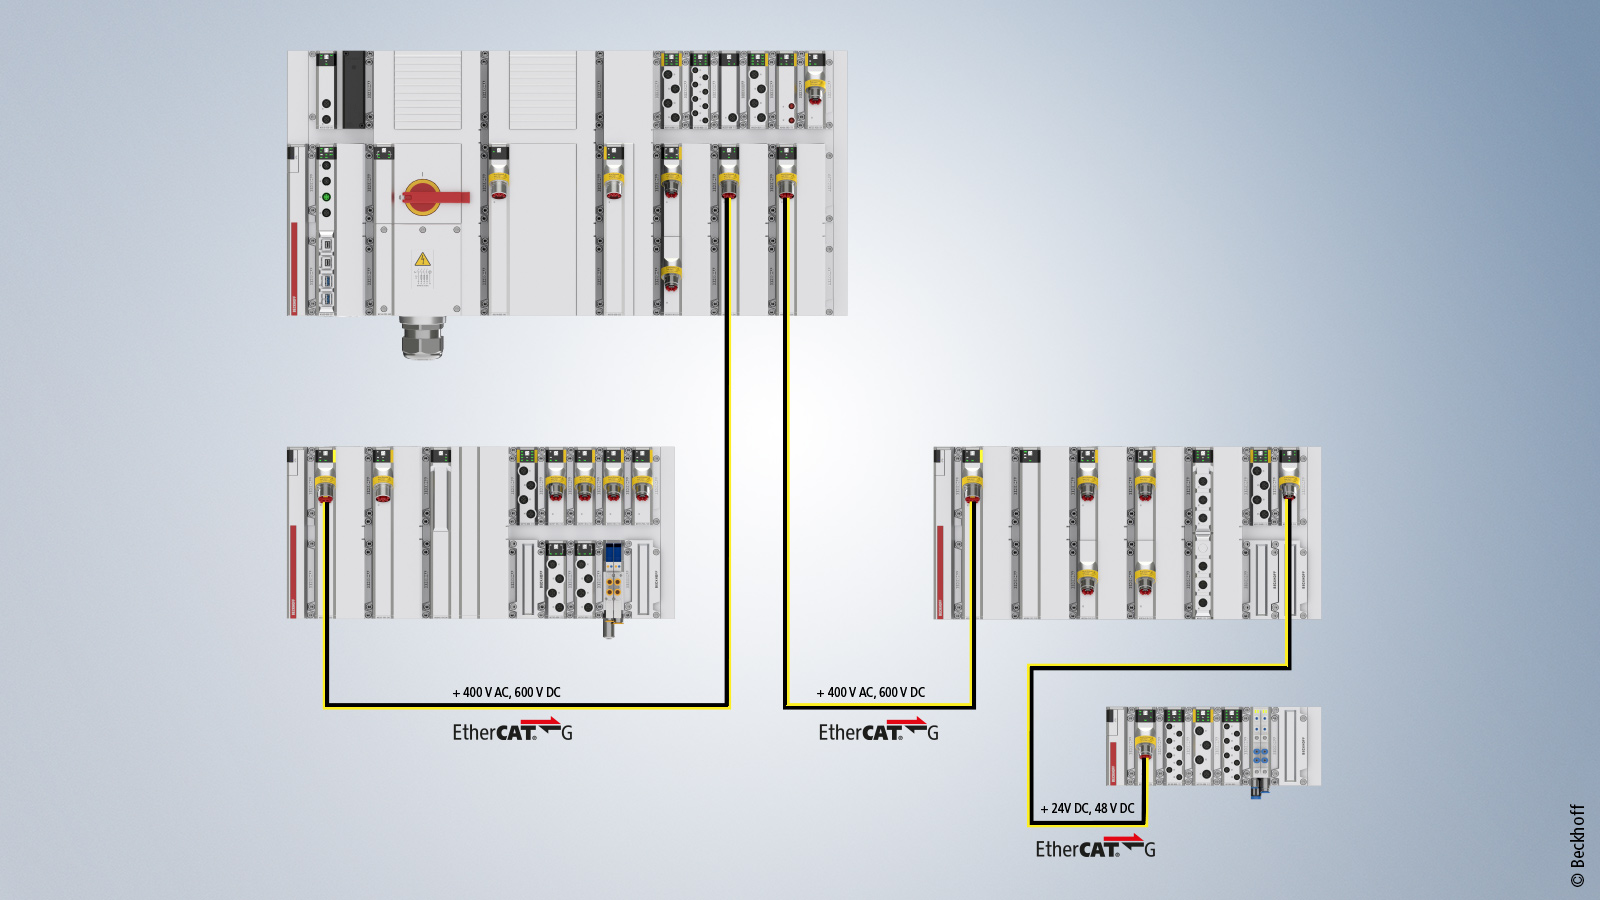 With the MX-System and EtherCAT, the conventional centralized approach becomes a decentralized distributed control cabinet.